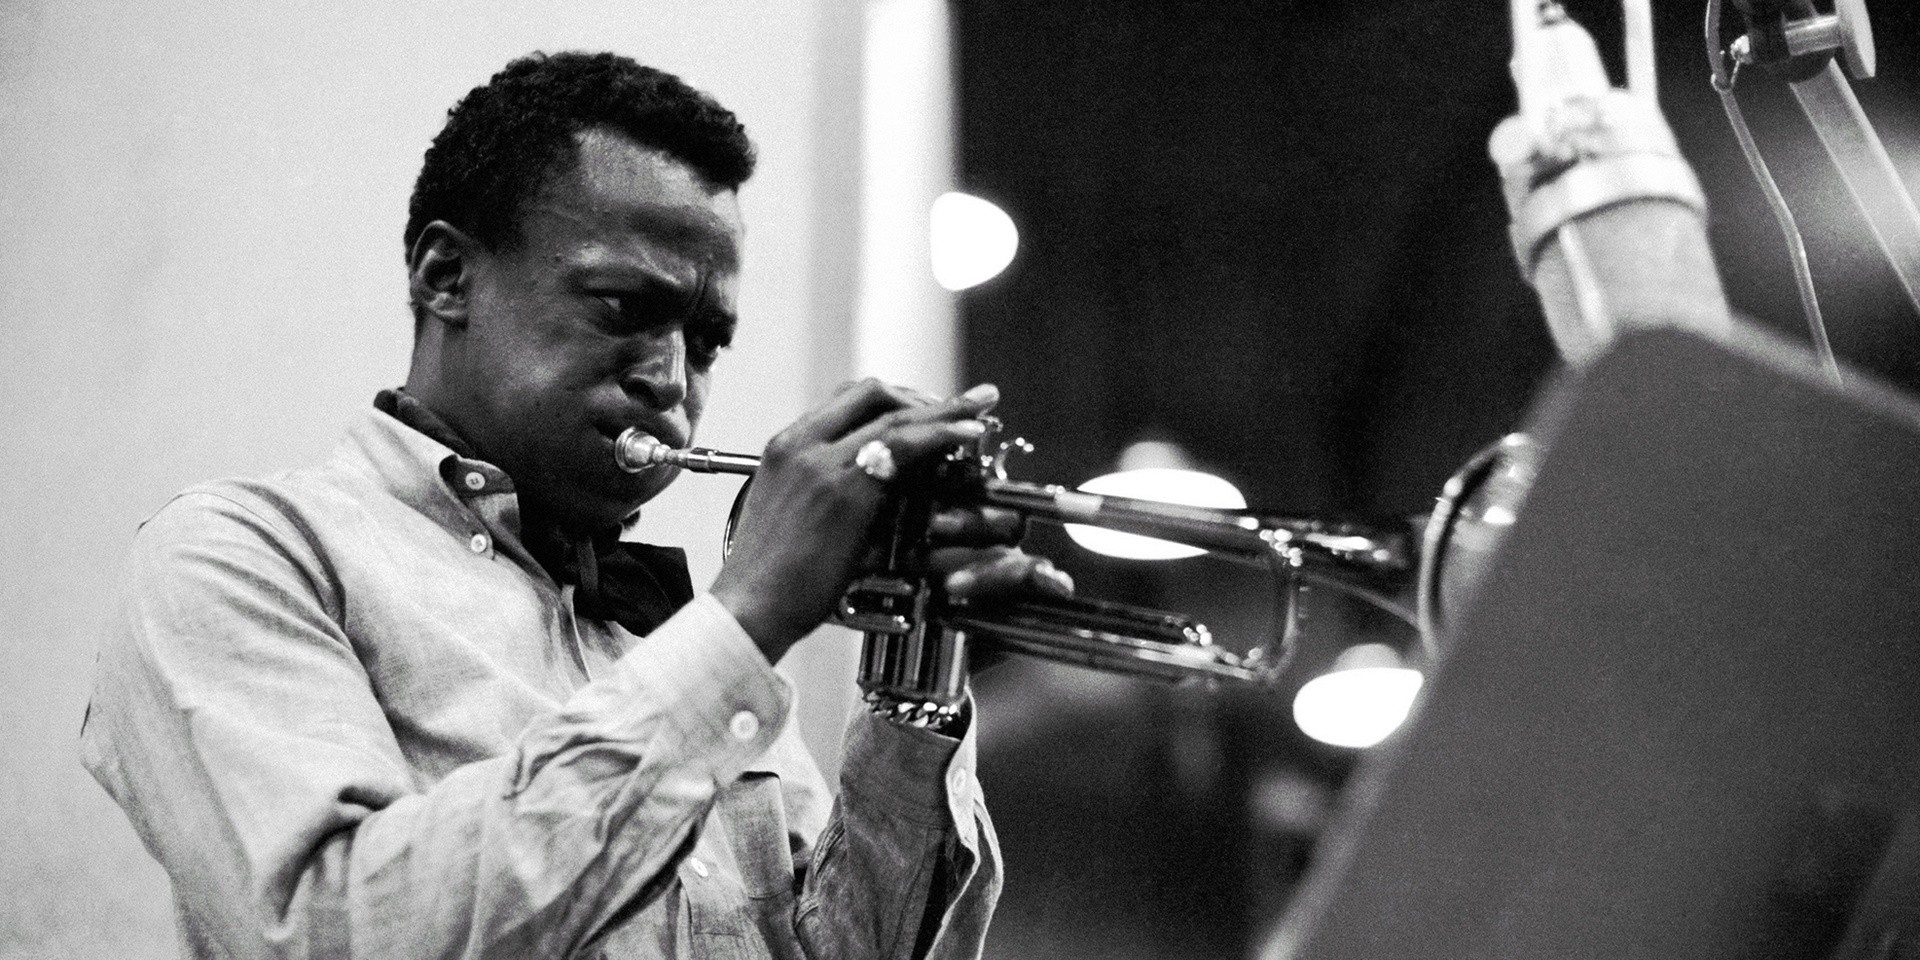 A group of Singaporean musicians will be paying tribute to Miles Davis